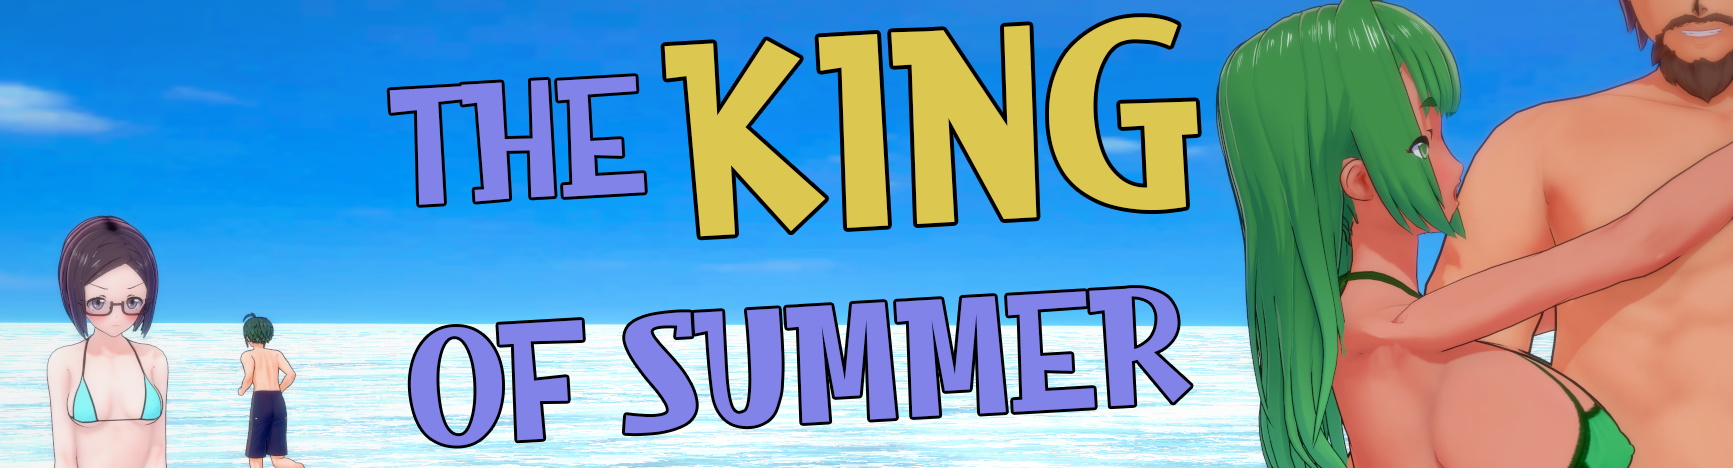 The King of Summer1.jpeg